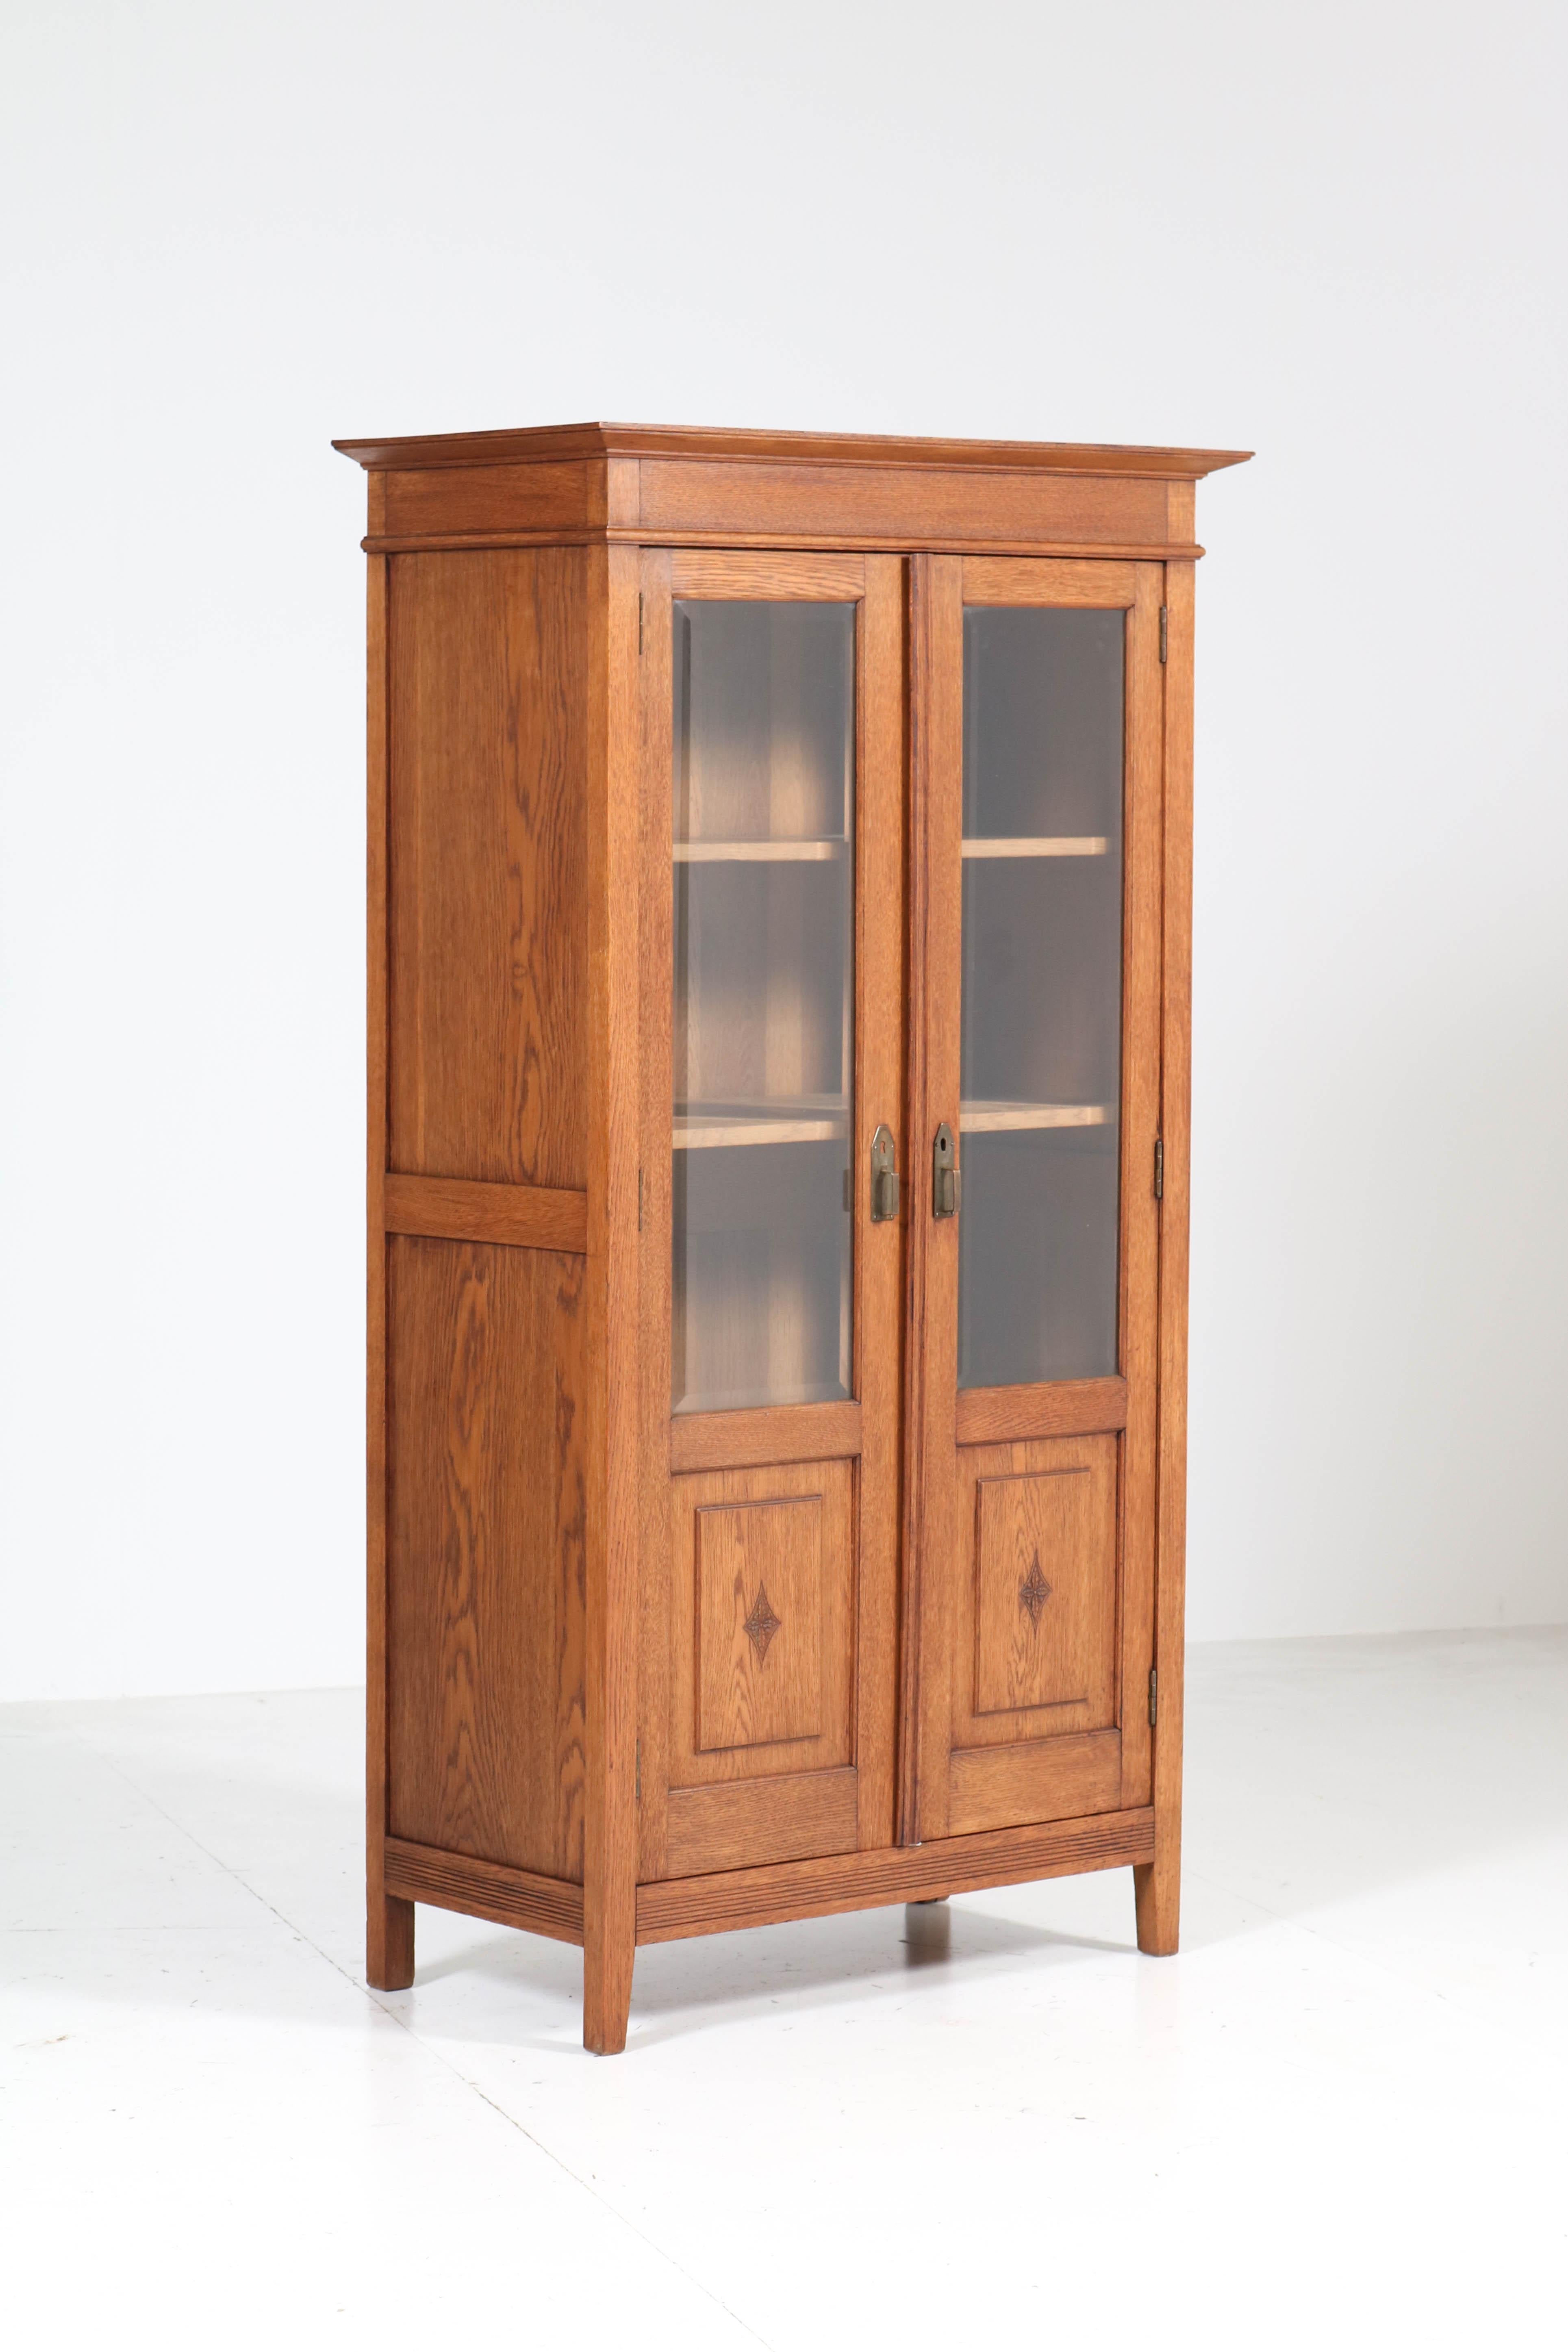 Stunning and rare Art Nouveau Arts & Crafts bookcase.
Striking Dutch design from the 1900s.
Solid oak with original brass handles.
Three original solid oak shelves adjustable in height.
Original beveled glass.
This piece of furniture cannot be